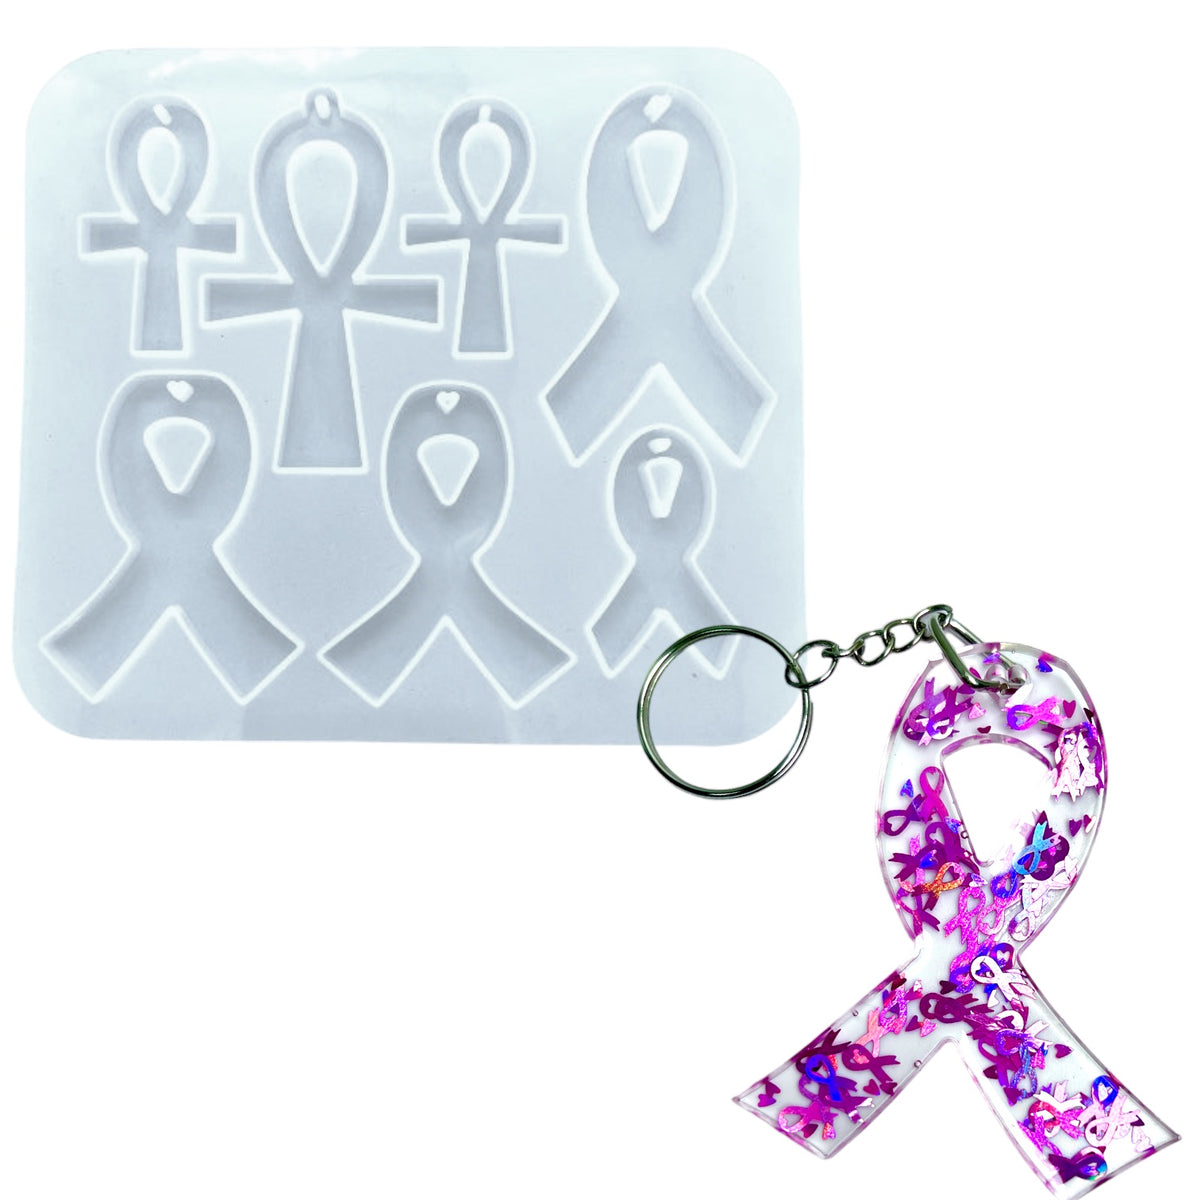 Cancer Awareness Ribbon Multiple Design Keychain Mold for UV and Epoxy Resin Art